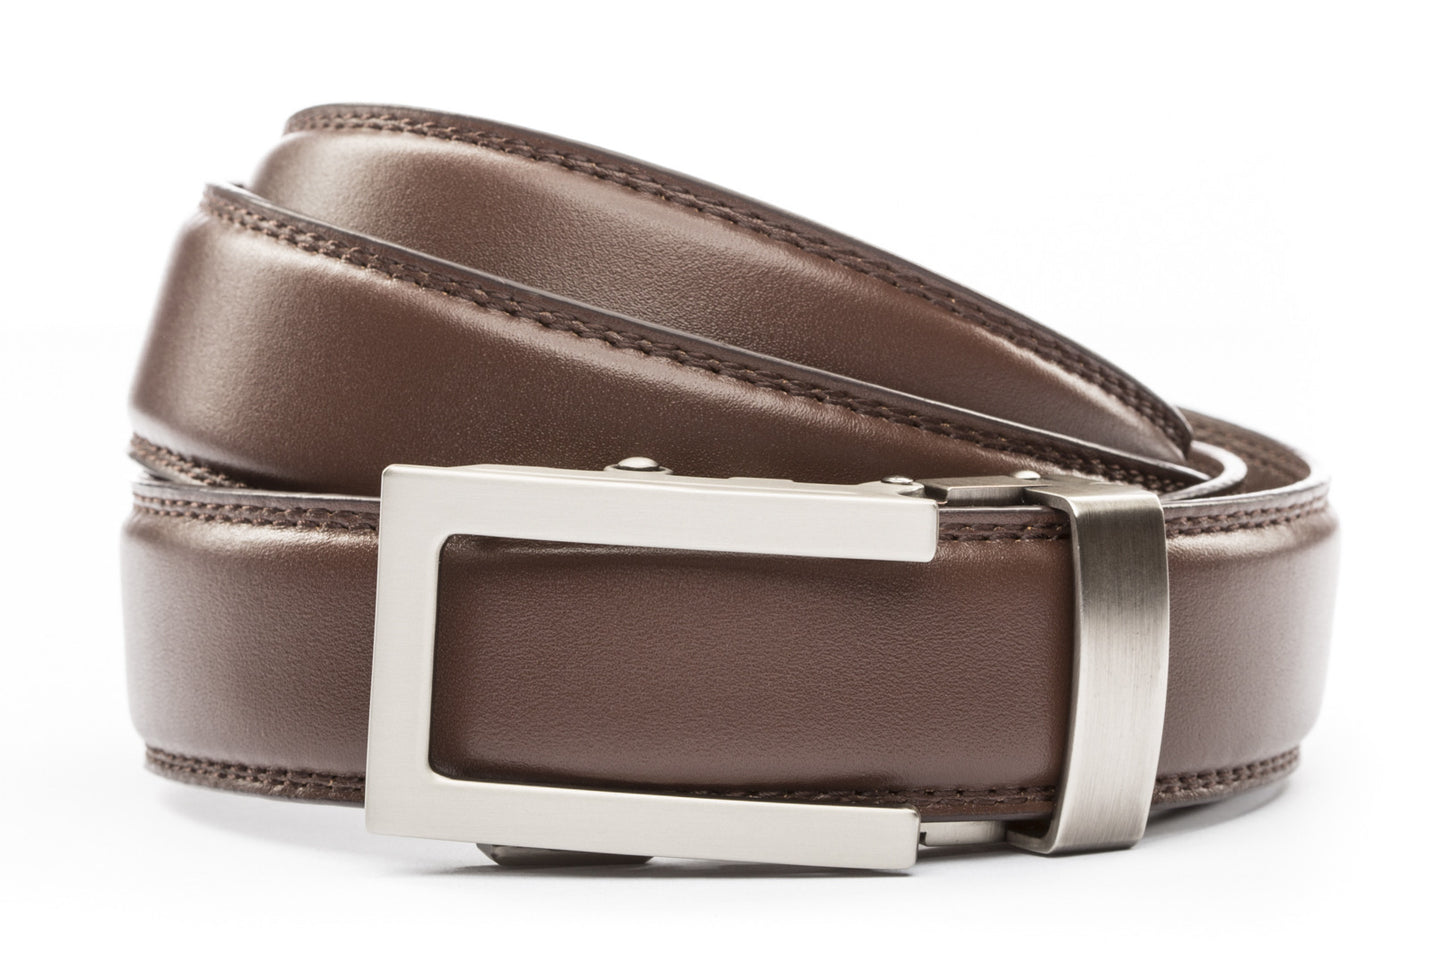 Chocolate Formal Leather w/Traditional in Gunmetal Buckle (1.25") - Anson Belt & Buckle